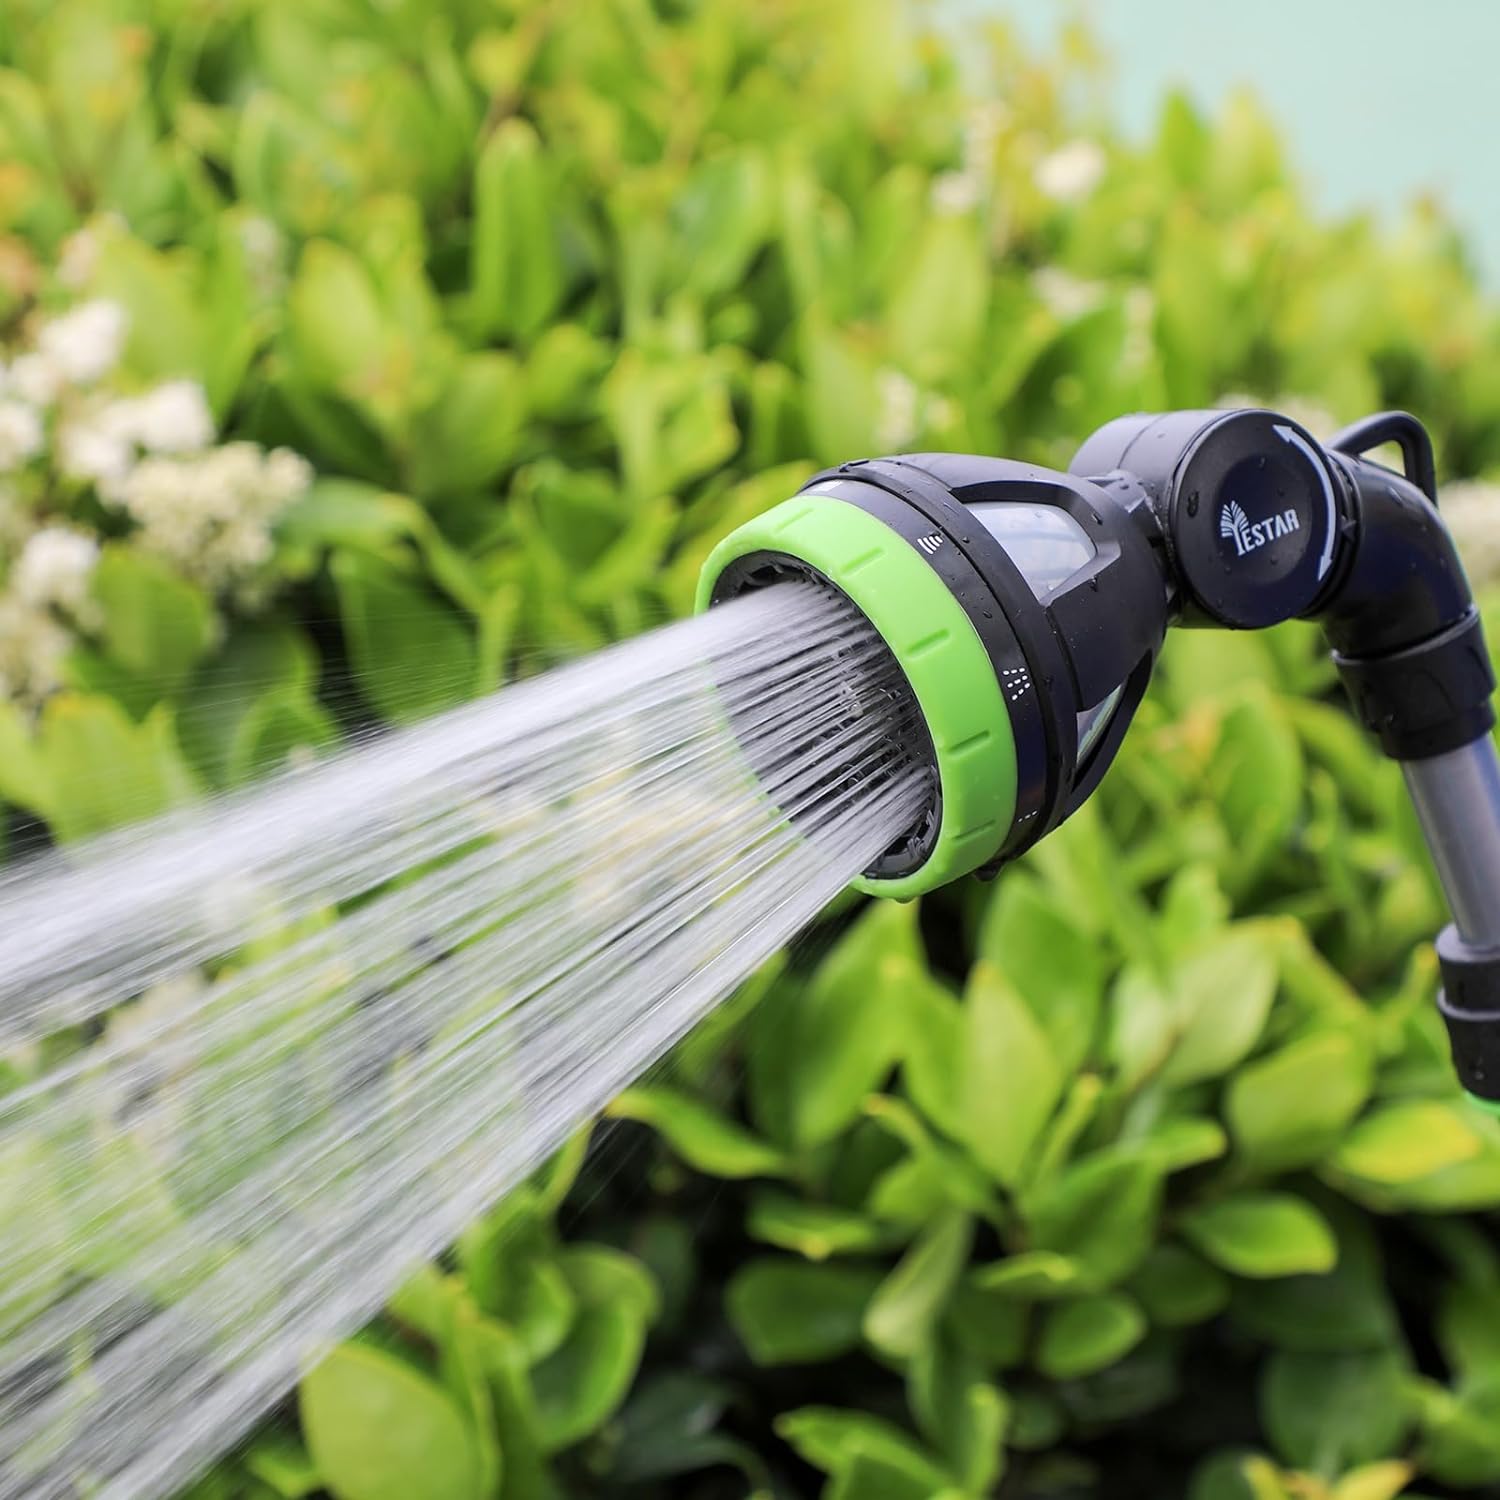 YESTAR Watering Wand Combo Metal Garden Hose Wand with 10 Spray Patterns 24-35 Inch Long Hose Nozzle Sprayer Ideal to Water Hanging Baskets and Shrubs